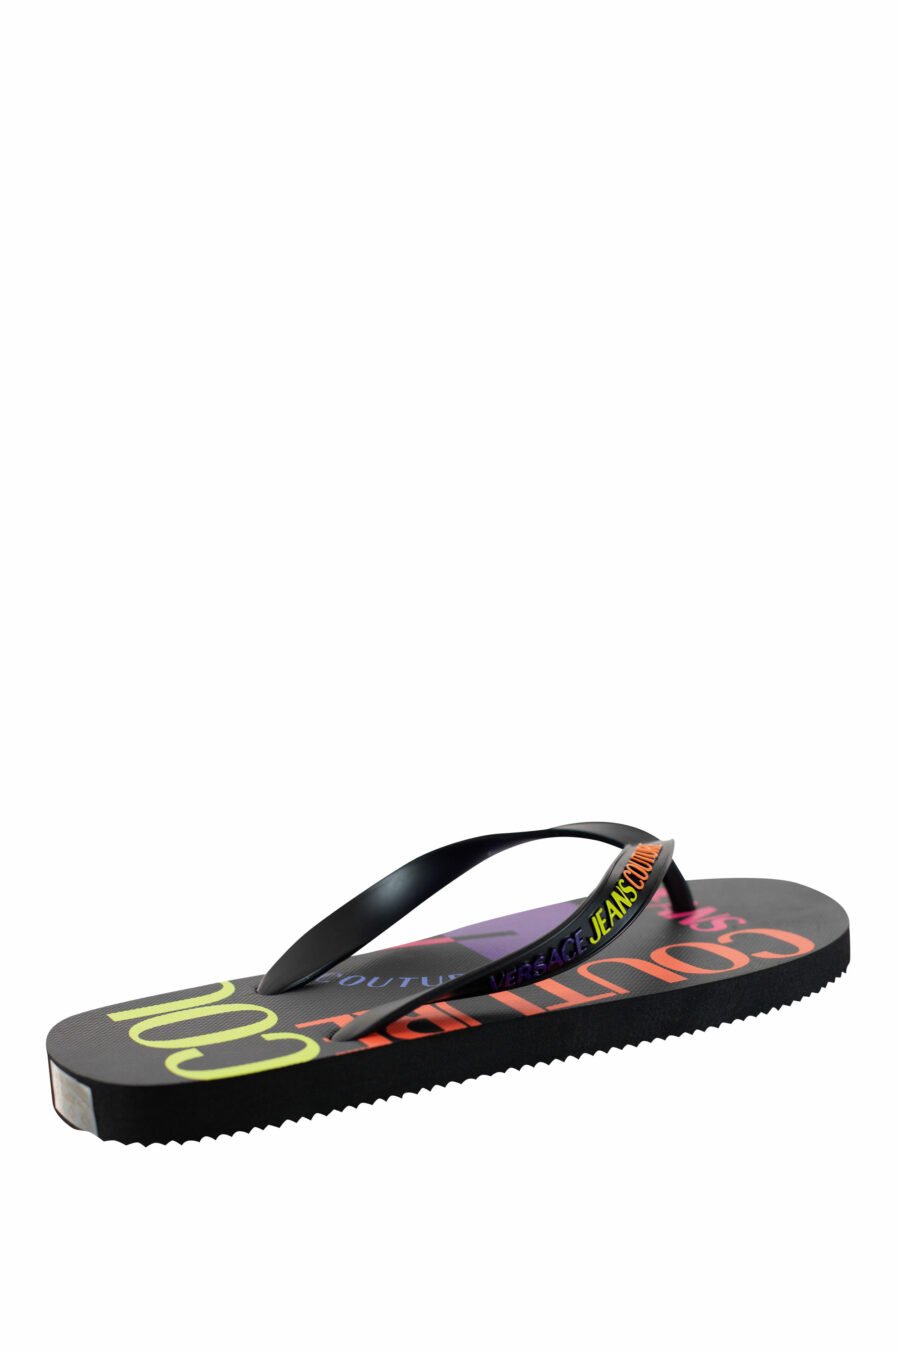 Tongs noires multicolores "logo all over" - IMG 4402